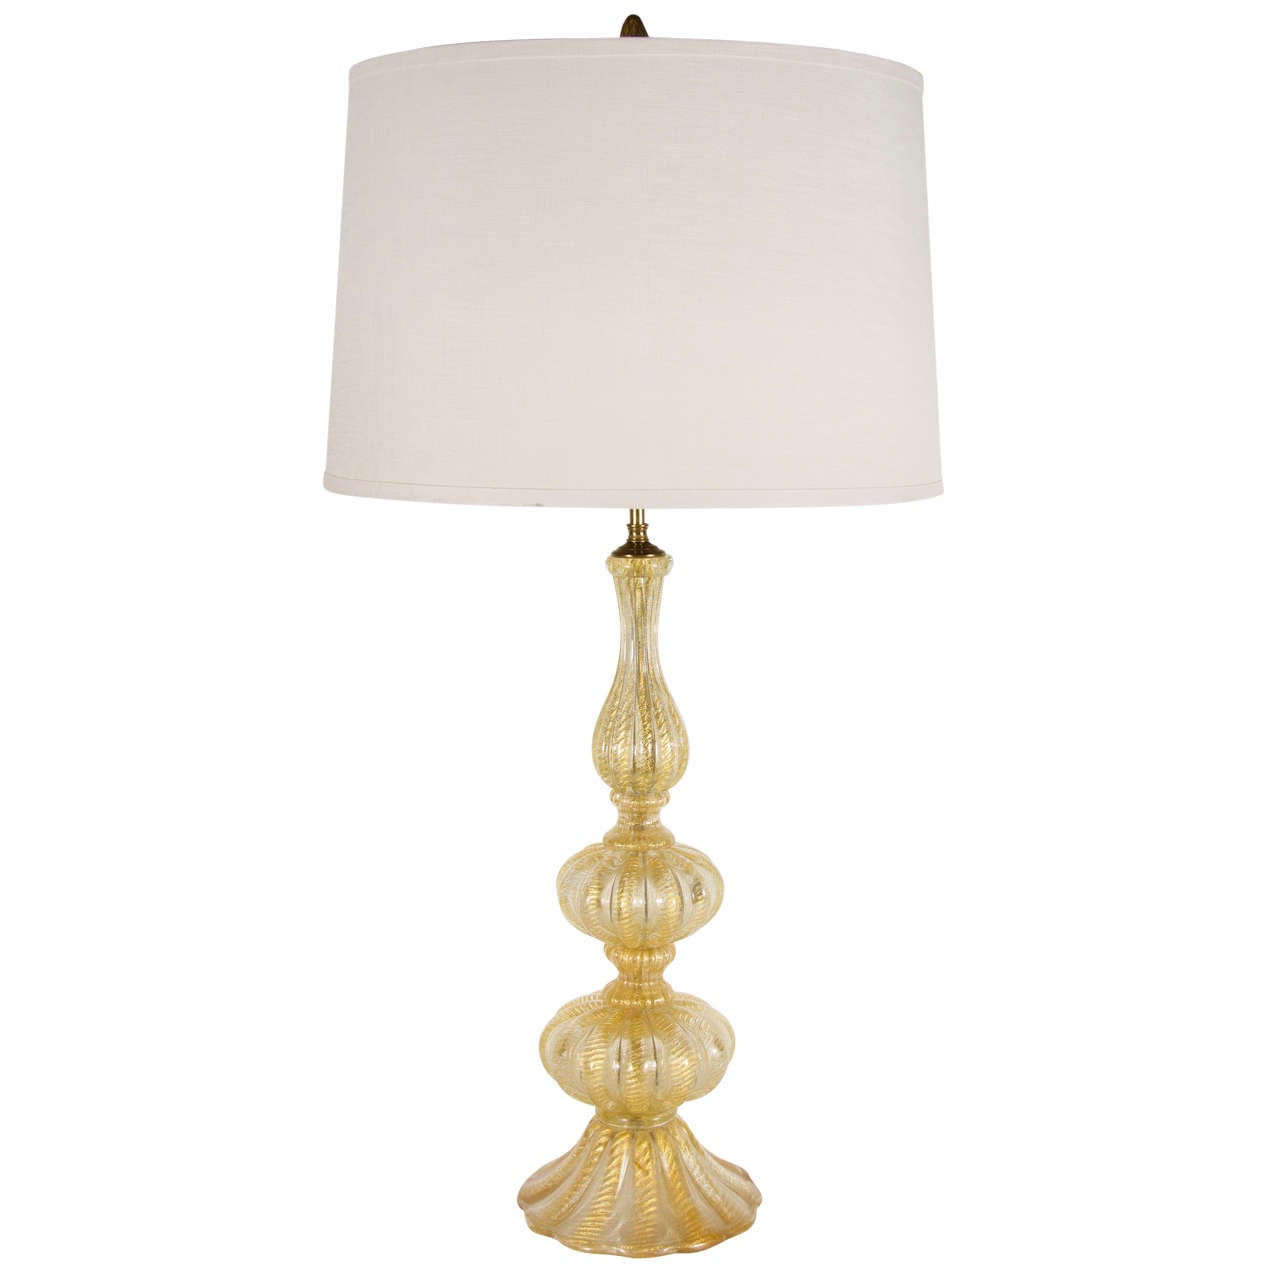 Mid-Century Modern Hand-Blown Table Lamp, 24kt Gold Flecks by Barovier e Toso